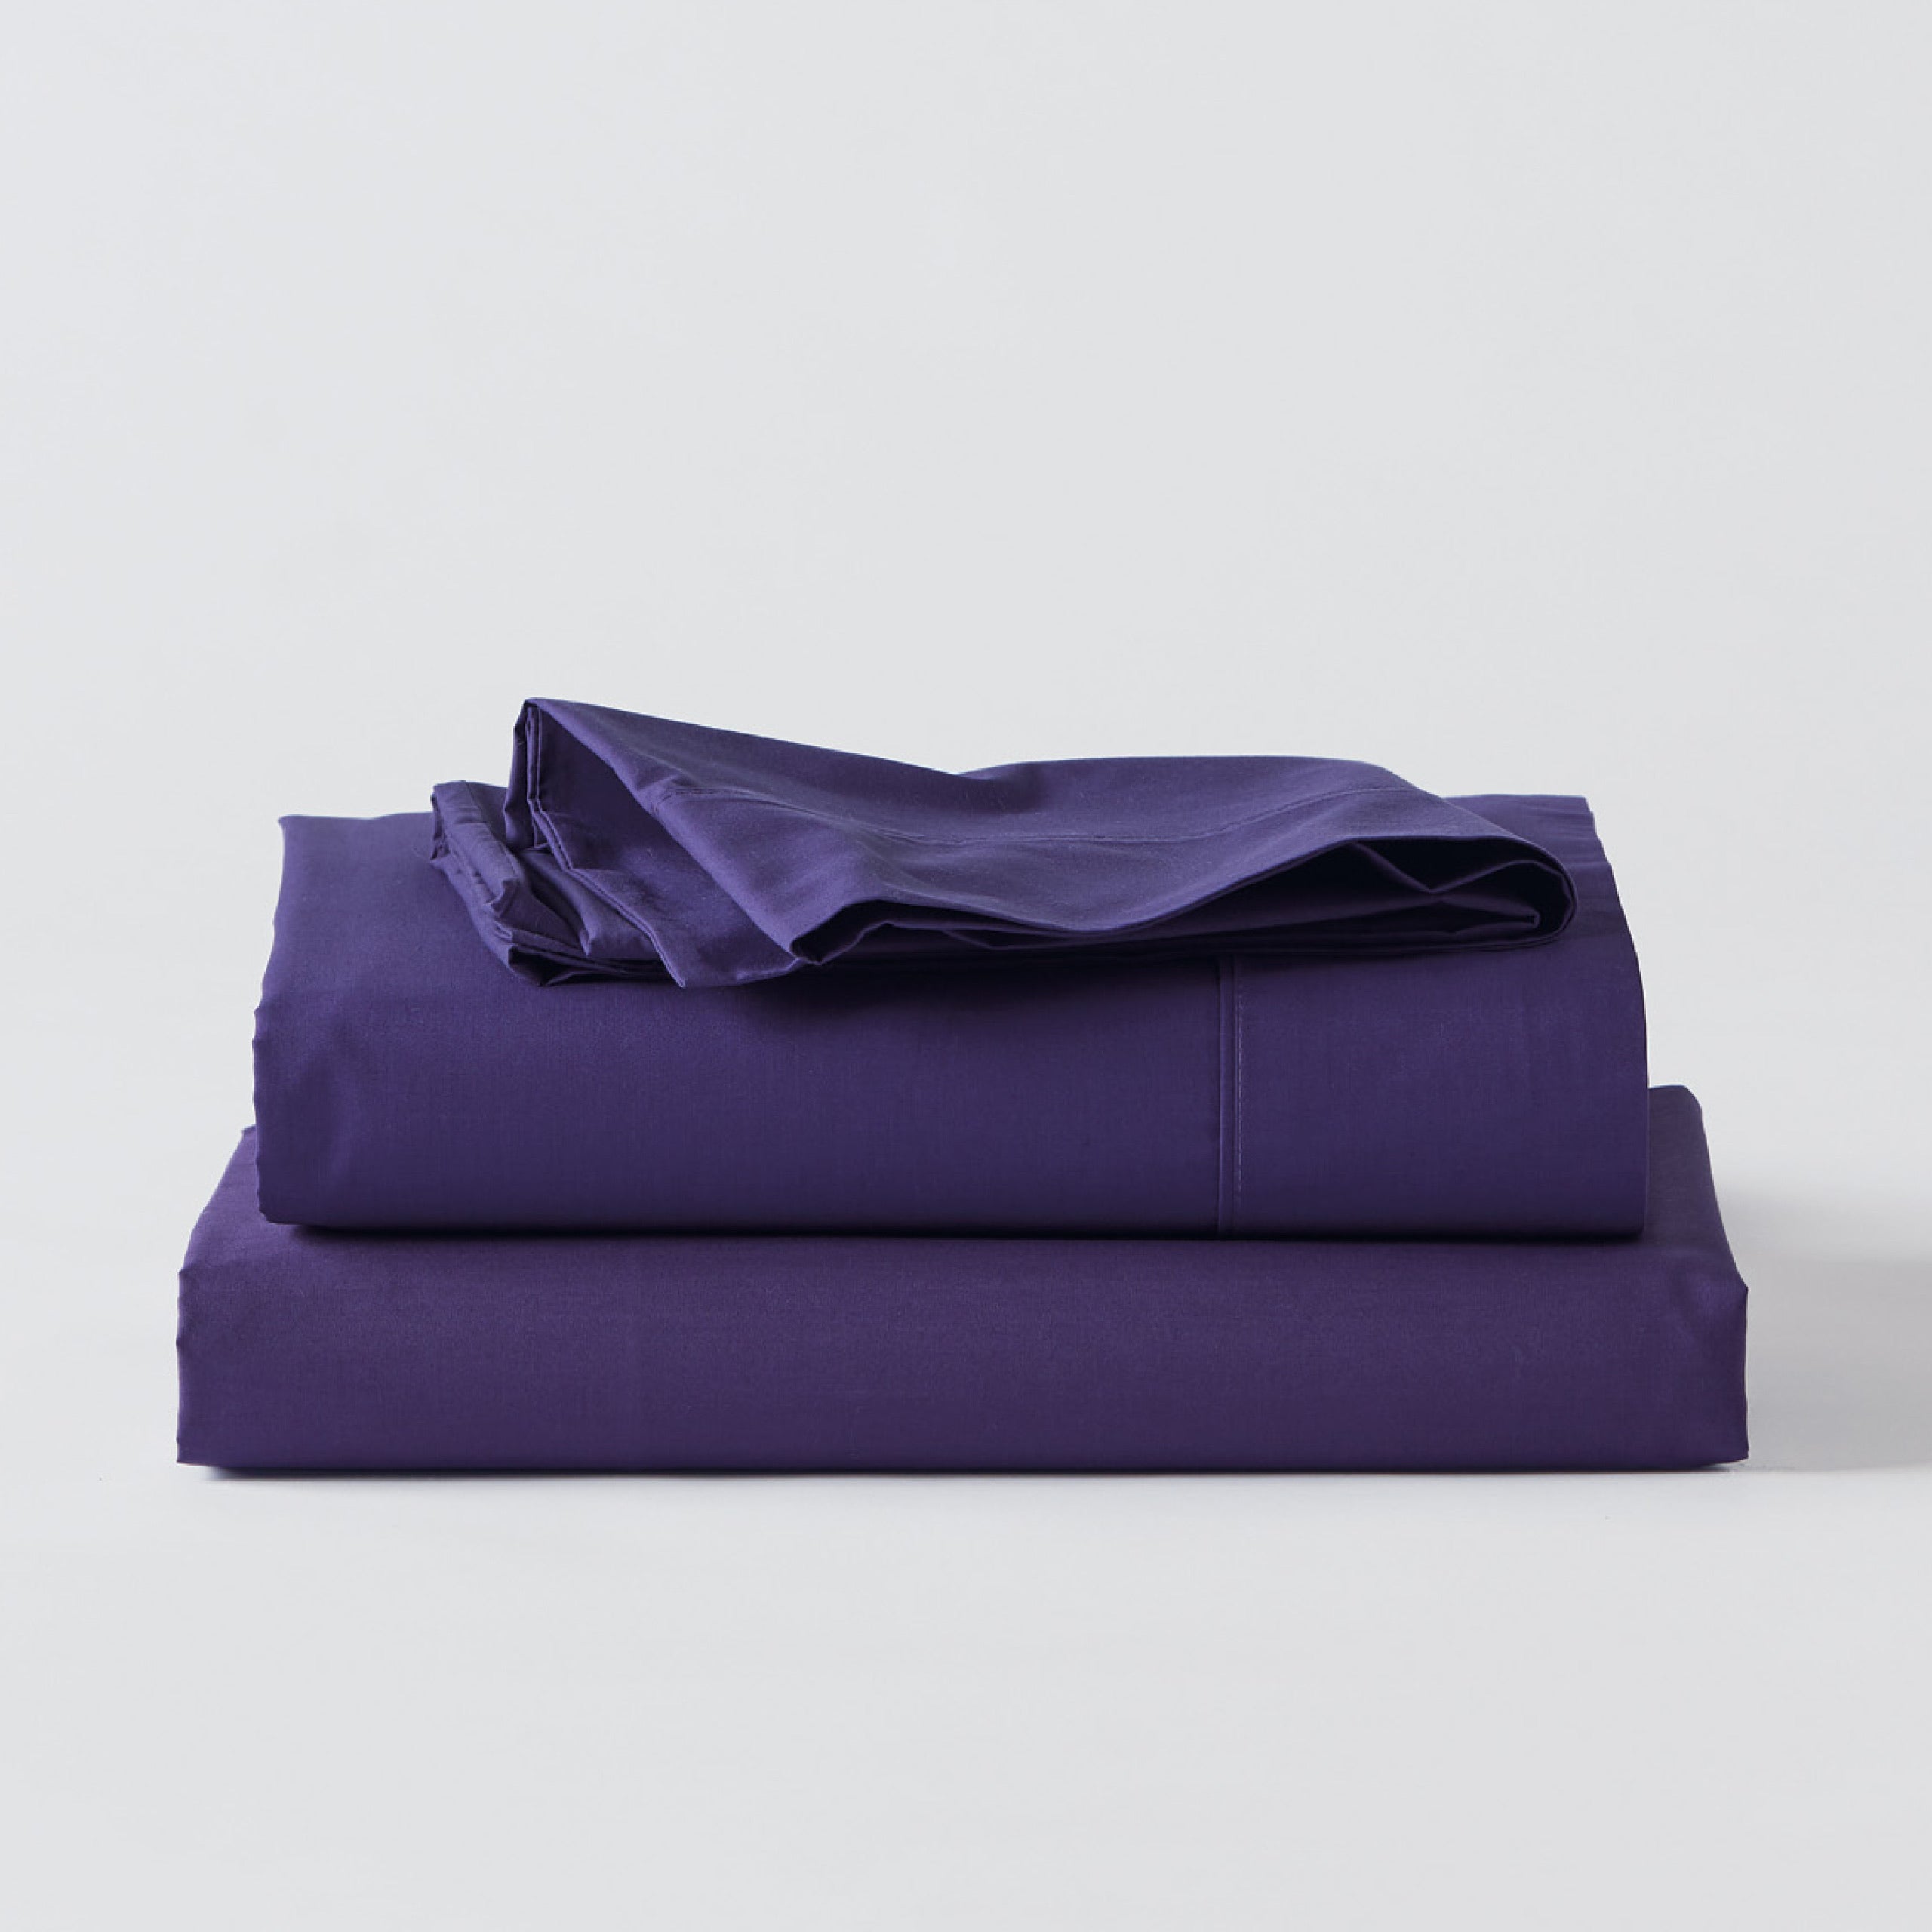 Premium Percale Purple Sheets folded up on floor